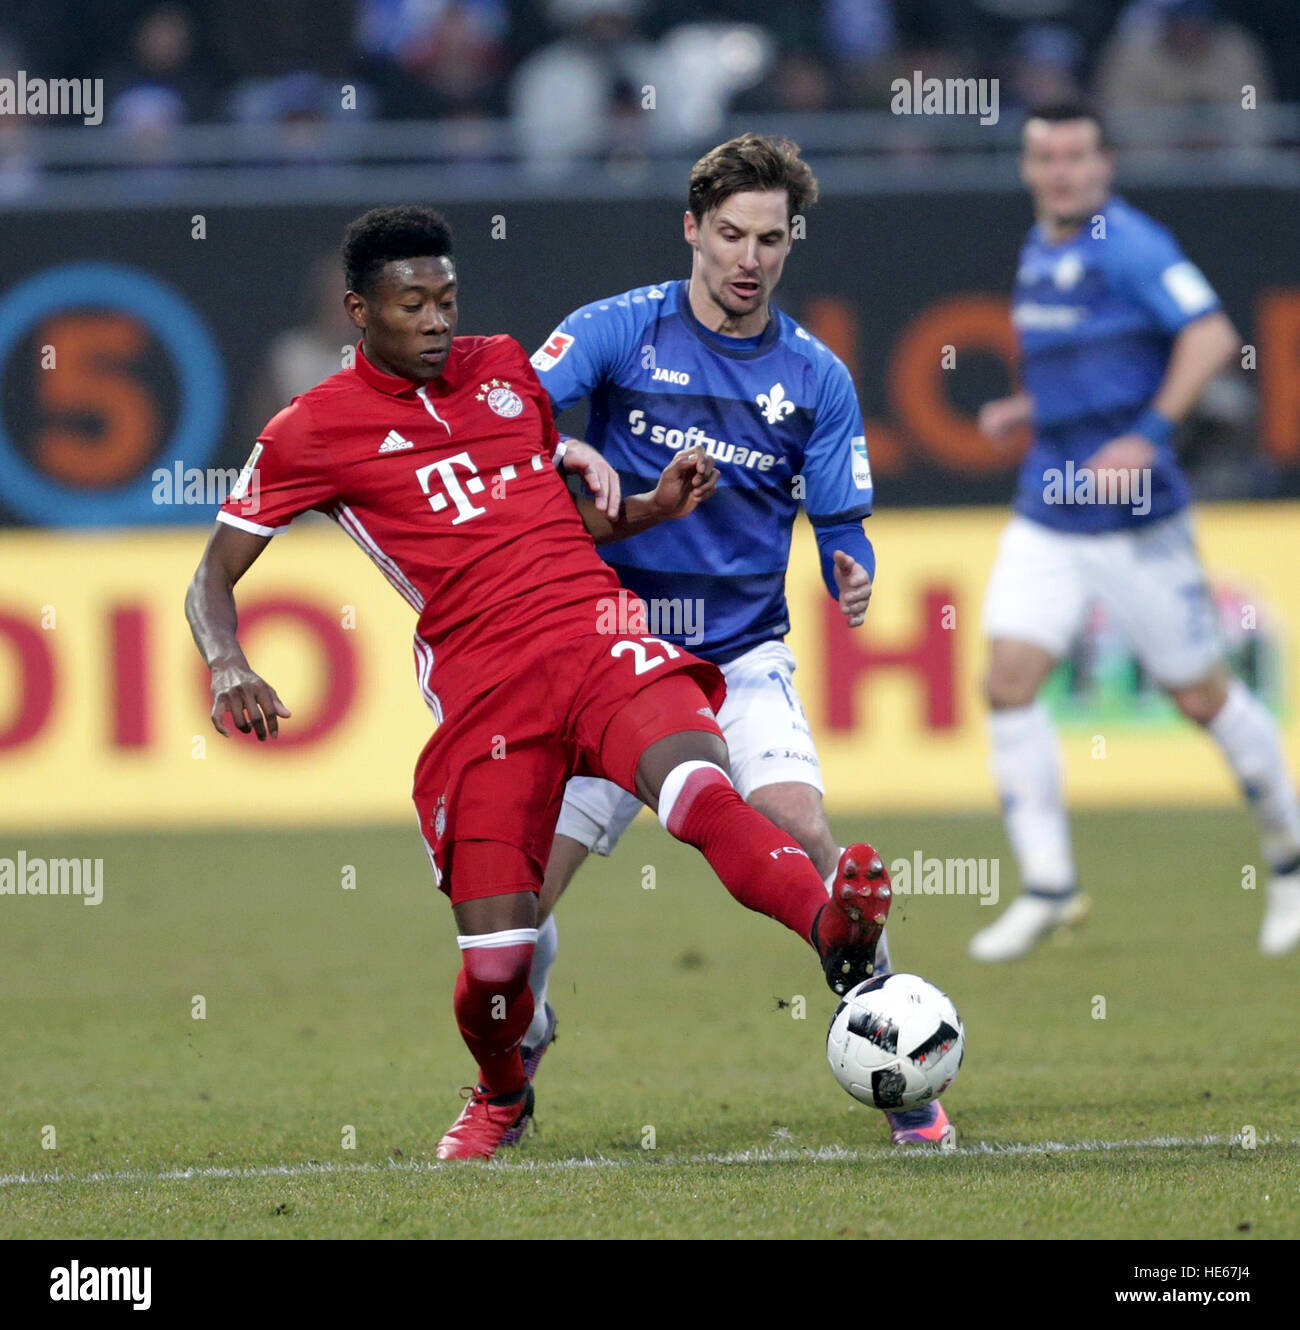 Darmstadst, Germany. 18th Dec, 2016. Darmstadt's Sandro Sirigu and Munich's David Alaba compete for the ball during the Bundesliga soccer match between Darmstadt 98 and Bayern Munich at Jonathan Heimes stadium in Darmstadst, Germany, 18 December 2016. Photo: Hasan Bratic/dpa/Alamy Live News Stock Photo